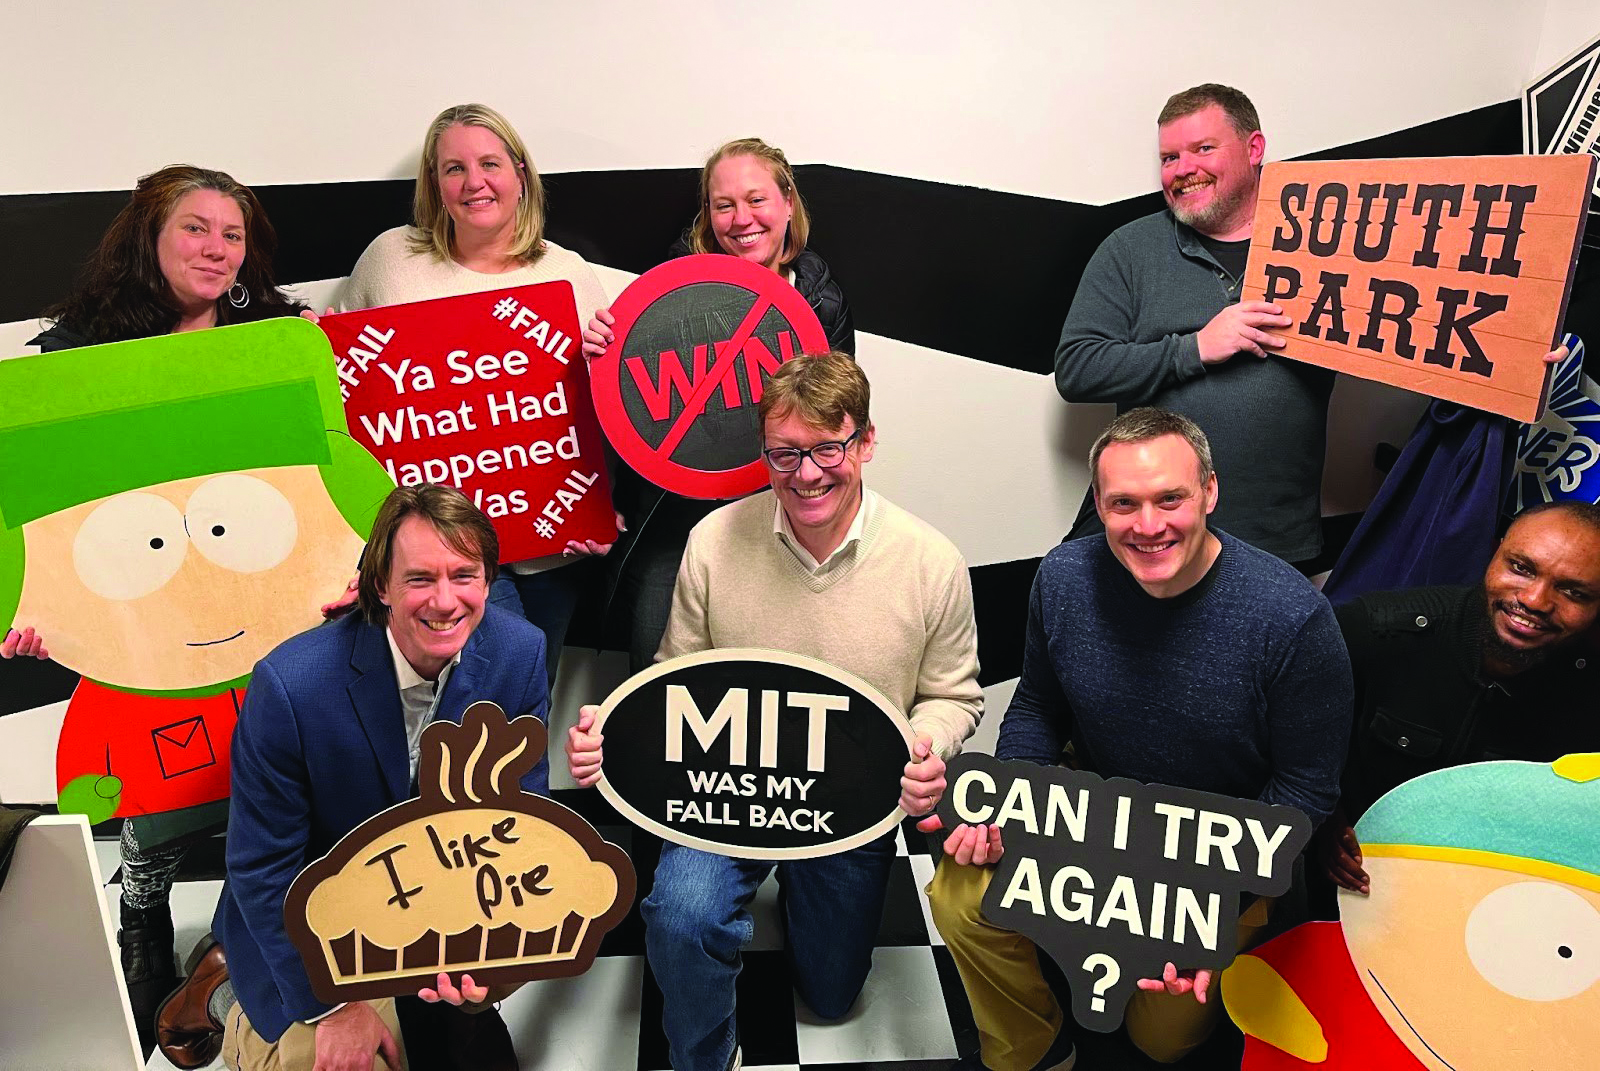 After the 2023 Joint Mathematics Meetings, which took place in Boston, Mass., in January, several attendees tried their luck in an escape room challenge. Top row, left to right: Kathleen Kavanagh (Clarkson University), Karen Bliss (Senior Manager of Education and Outreach at SIAM), Karen Yokley (Elon University), and Nick Luke (North Carolina Agricultural and Technical State University). Bottom row, left to right: Richard Moore (Director of Programs and Services at SIAM), SIAM President Sven Leyffer (Argonne National Laboratory), Ben Galluzzo (Clarkson University), and Adewale Adeolu (Clarkson University). Photo courtesy of Sven Leyffer.